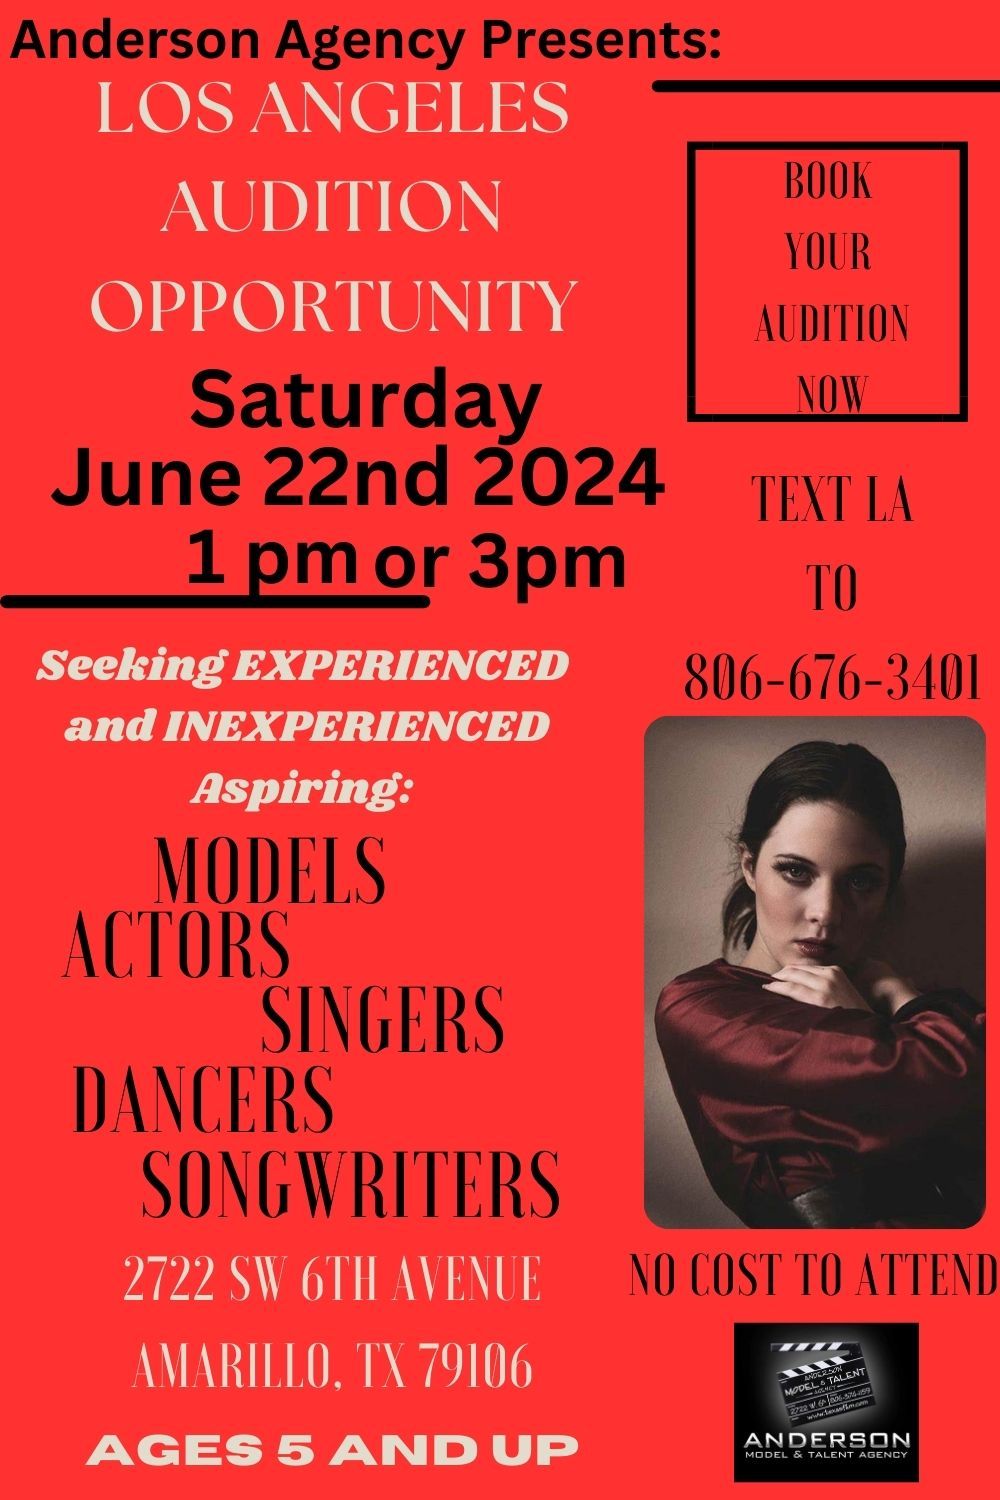 Amarillo- Los Angeles Audition Opportunity- CALLING ALL ACTORS MODELS SINGERS SONGWRITERS DANCERS